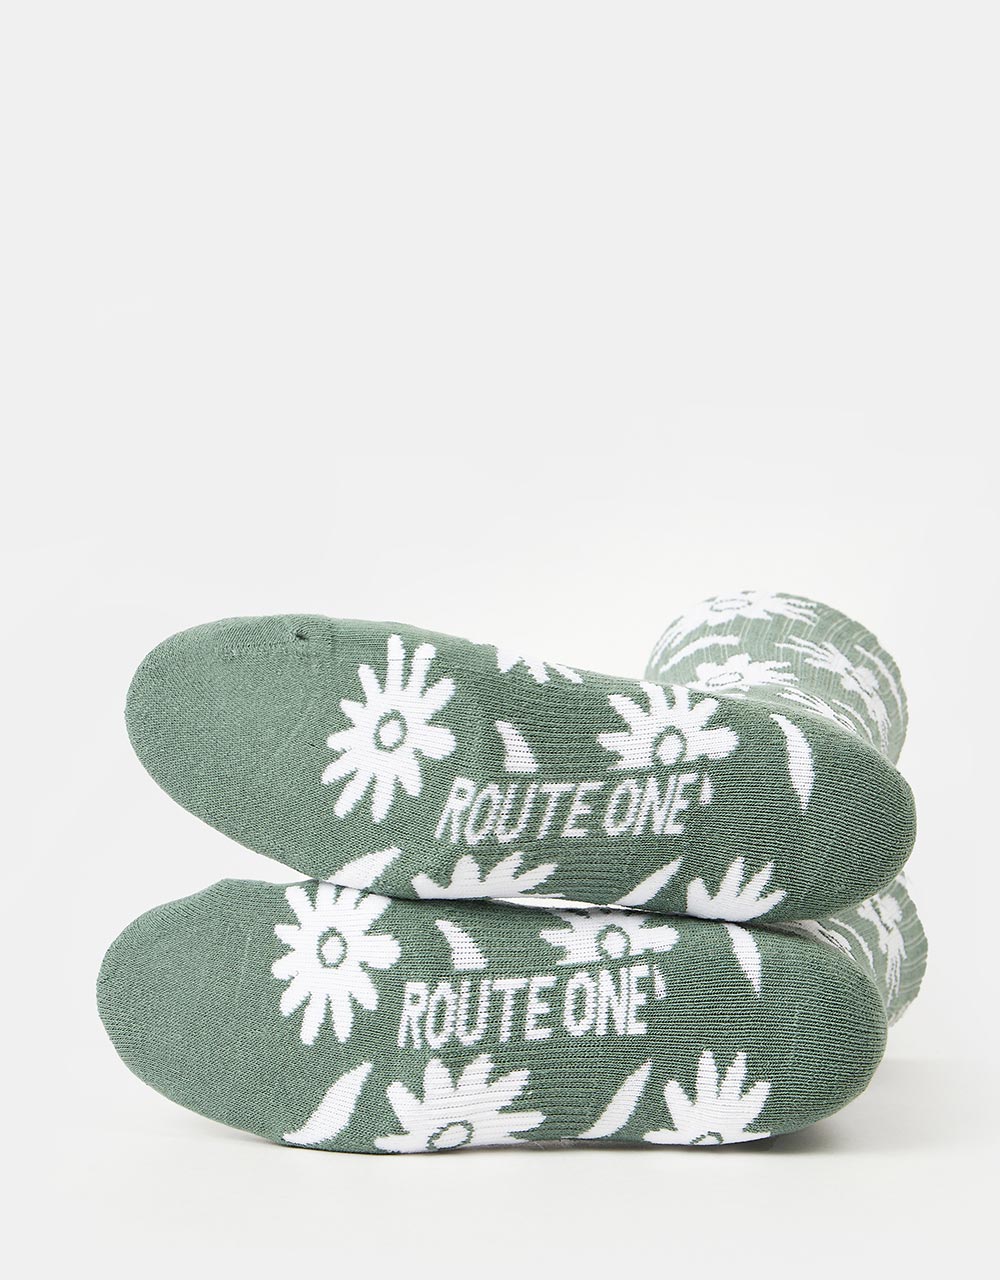 Route One Growth Socks - Green